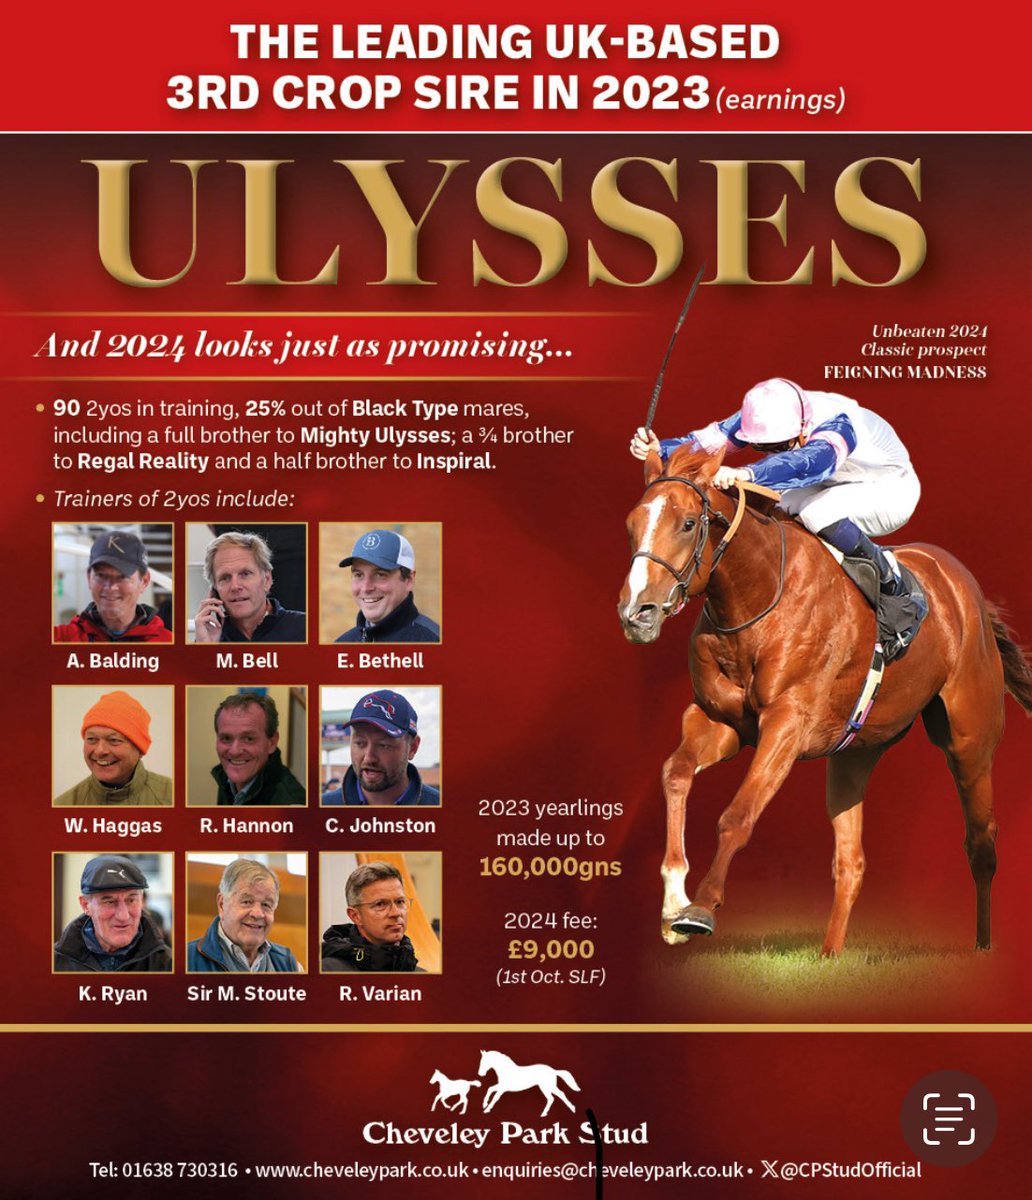 📢There’s plenty to look forward to with ULYSSES in 2024! With 90 2yo’s in training, 25% of which are out of Black Type mares. Their trainers include @WilliamHaggas @varianstable @AndrewBalding2 @ebethellracing Give us a call ☎️ to book your nomination.